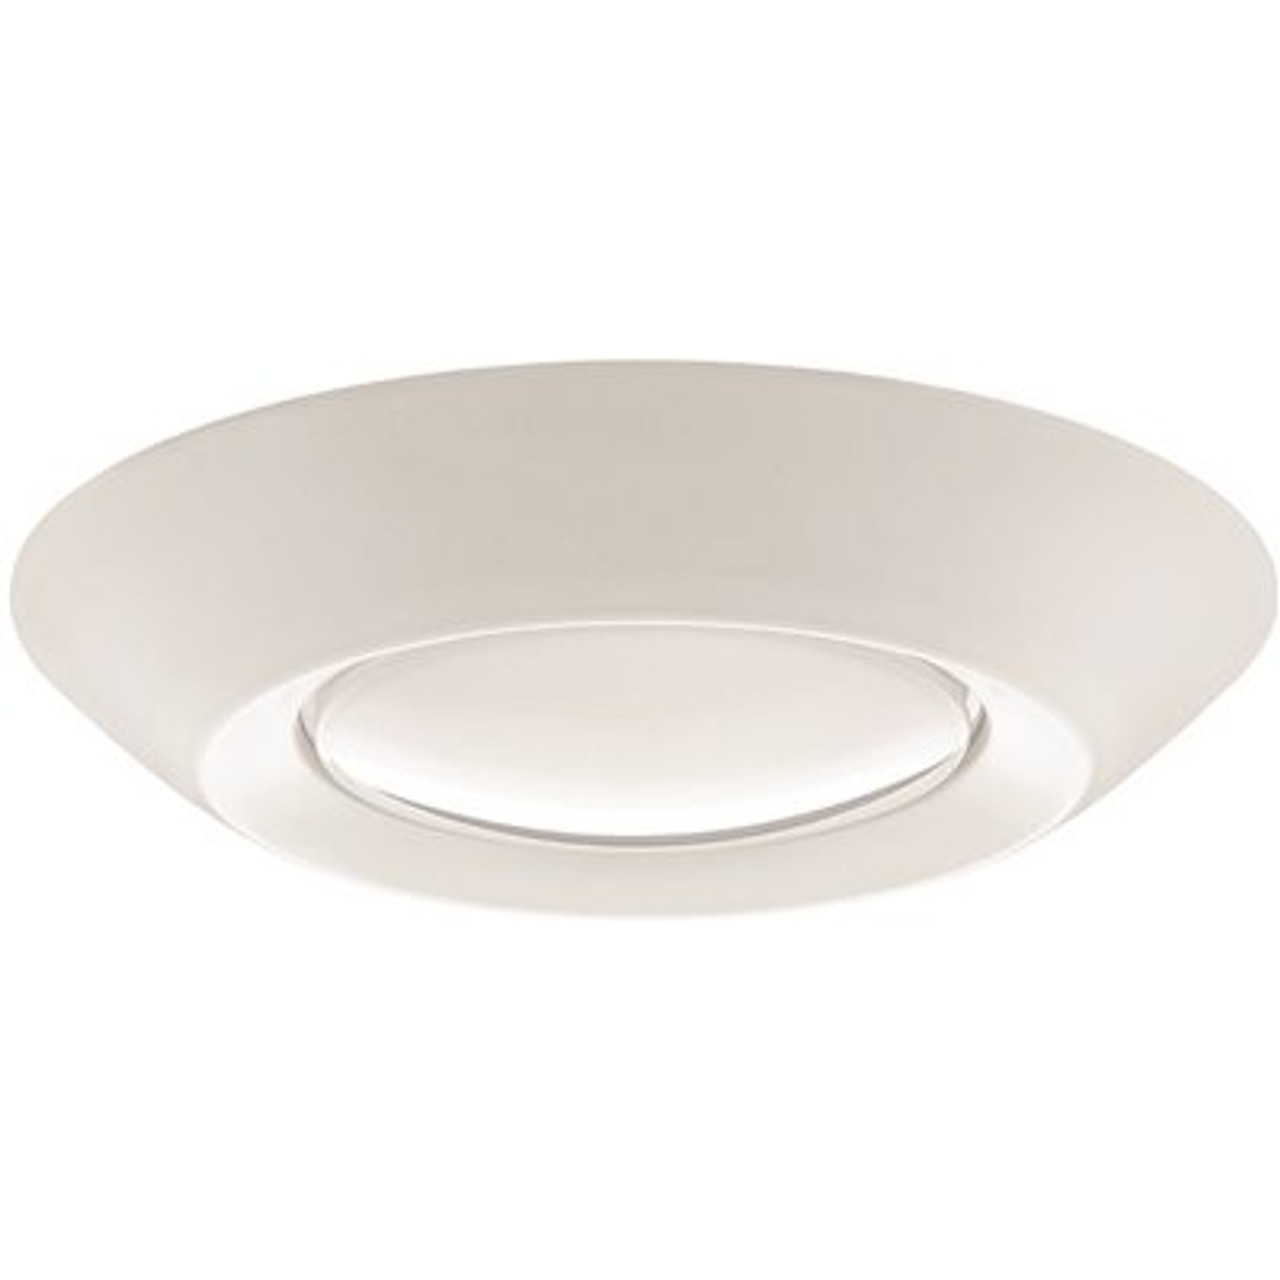 ETi 5 in./6 in. 14-Watt 3000K Soft White Integrated LED Recessed Trim Disk Light 1000 Lumen Mount into Recessed Can or J-Box